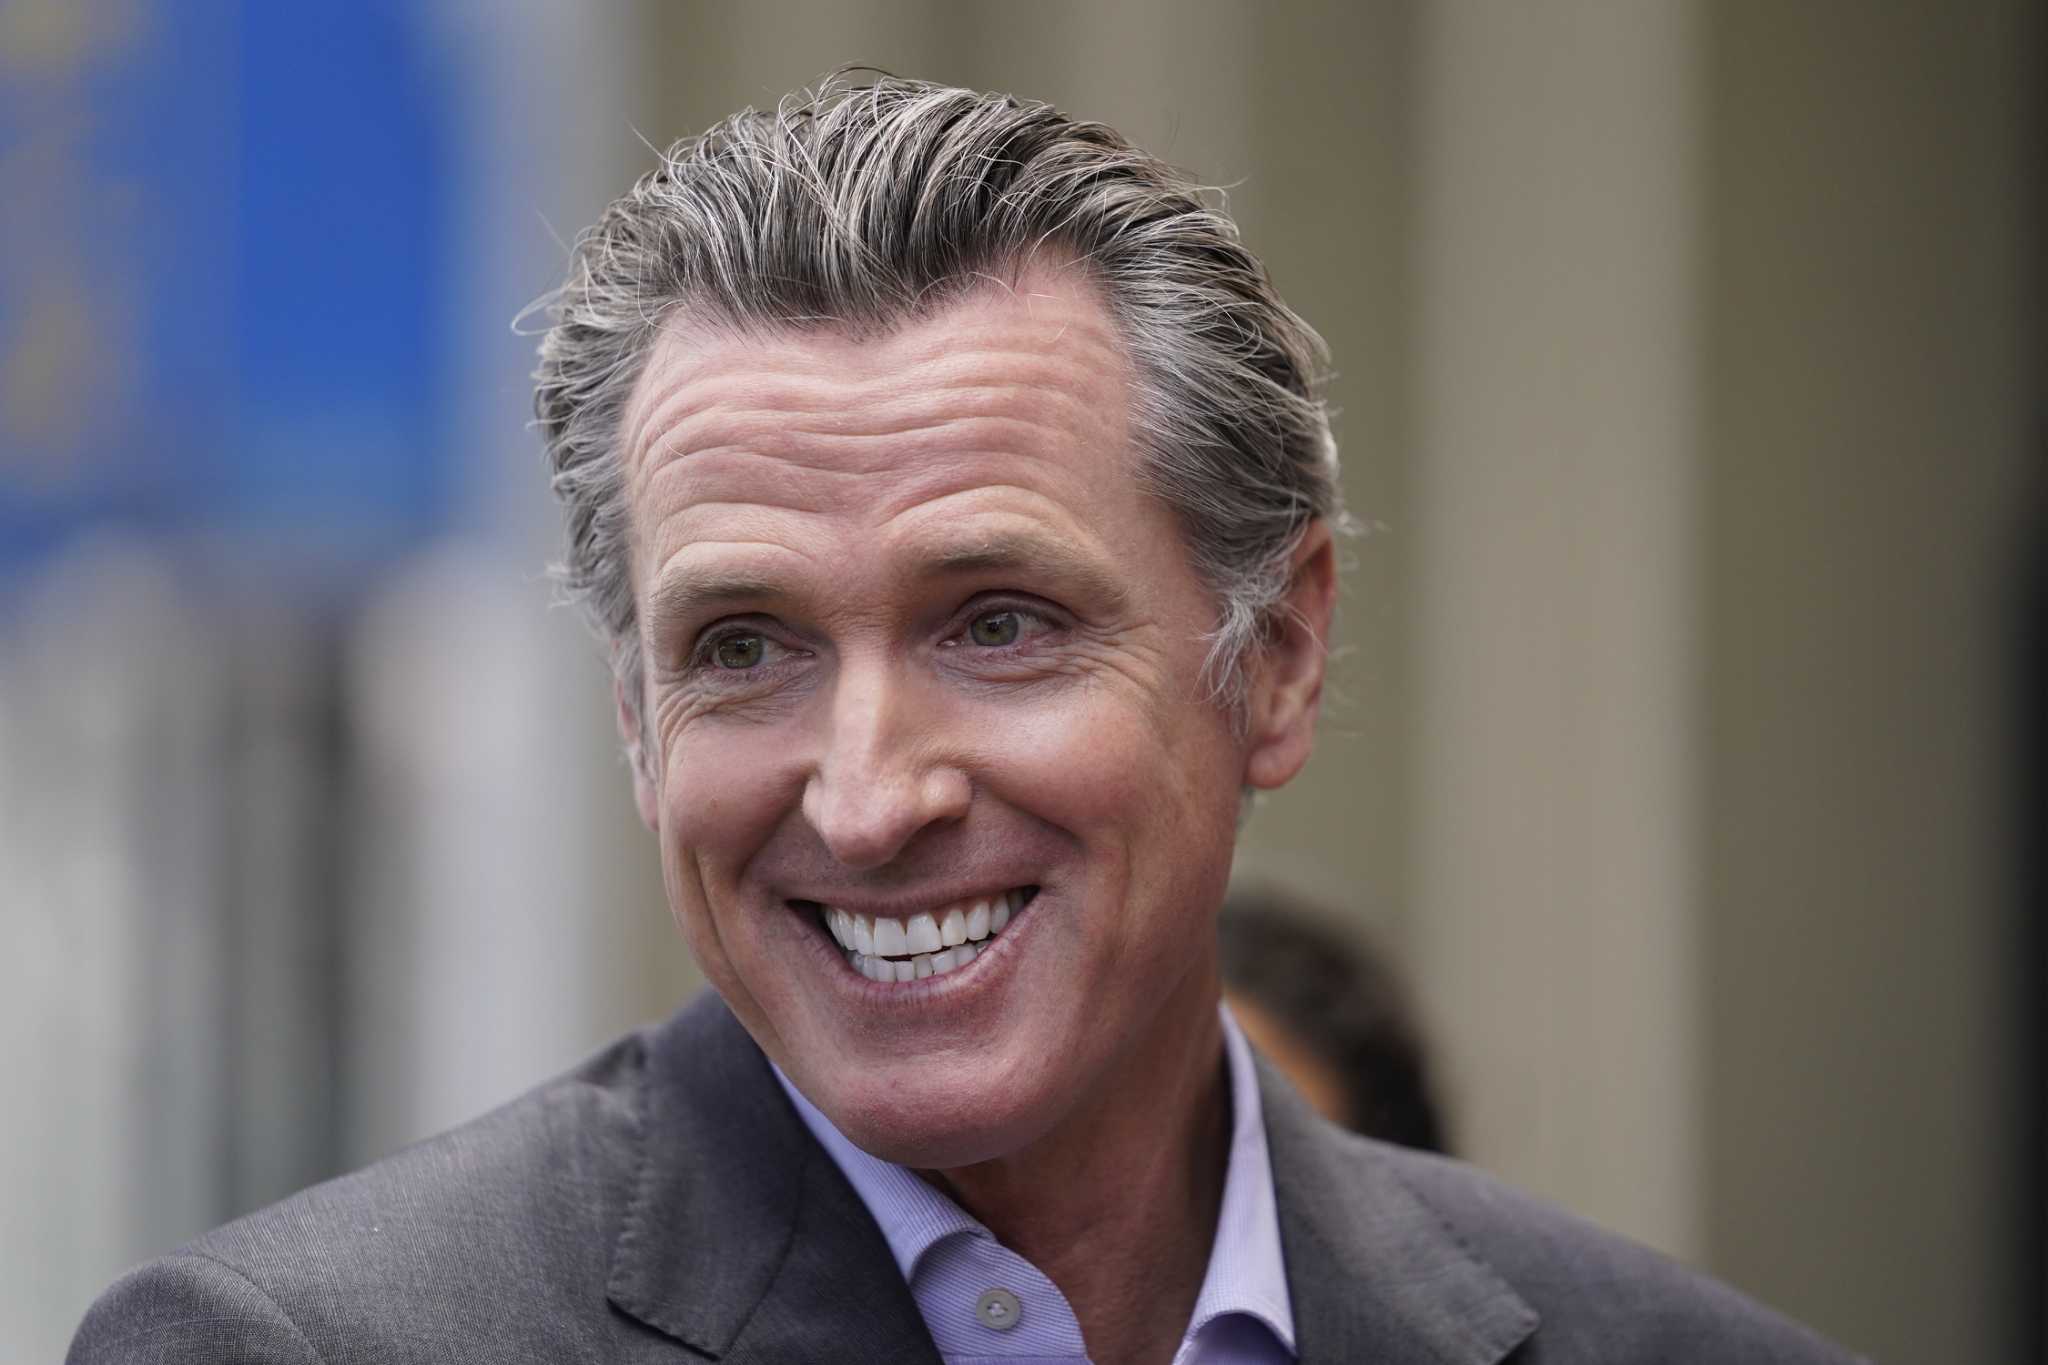 California Gov. Gavin Newsom smiles during a news conference in San Francisco, on Thursday, June 3, 2021. Newsom has signed an executive order that wi